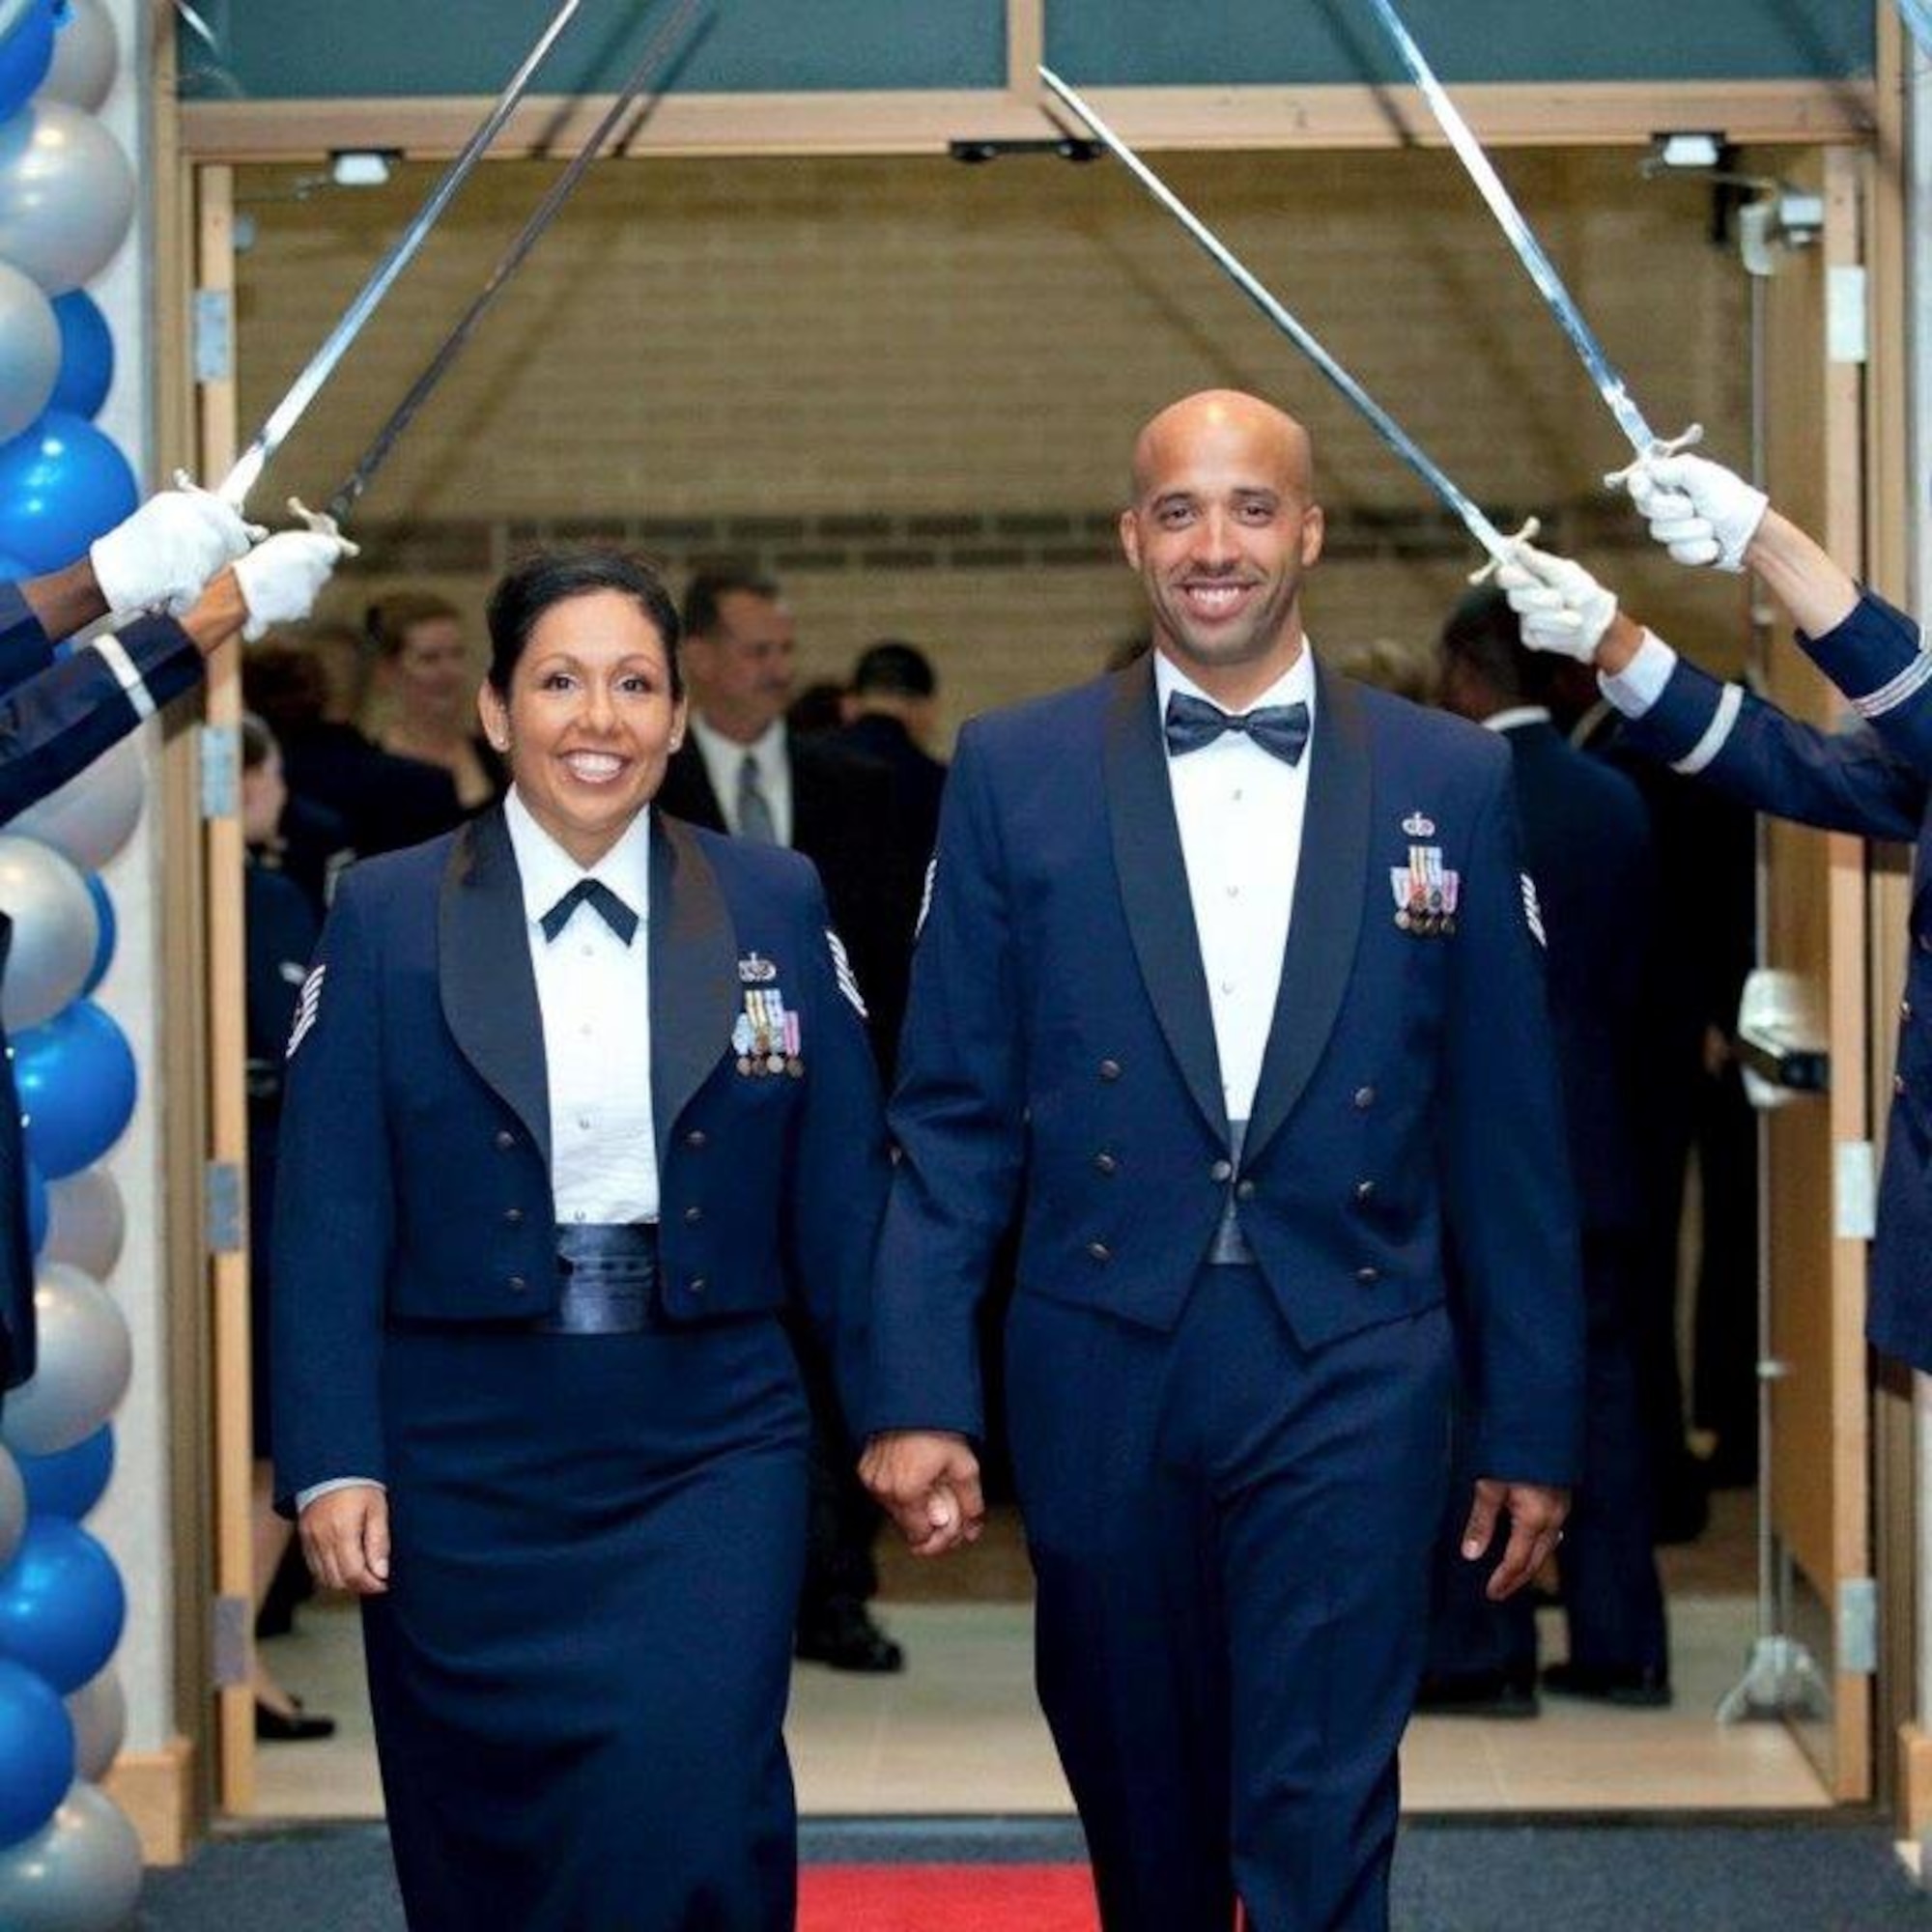 Tech. Sgt. Terrance Williams, the 22nd Security Forces Squadron resources NCO in charge, and his wife, Tech. Sgt. Nichol Williams, now a retired master sergeant, attend the Air Force Gala in February 2012, at McConnell Air Force Base, Kan. After his battle with depression, anxiety, alcoholism, post-traumatic stress disorder and a suicide attempt, Terrance said his wife’s support was one of the most important aspects to his recovery. (Courtesy photo)